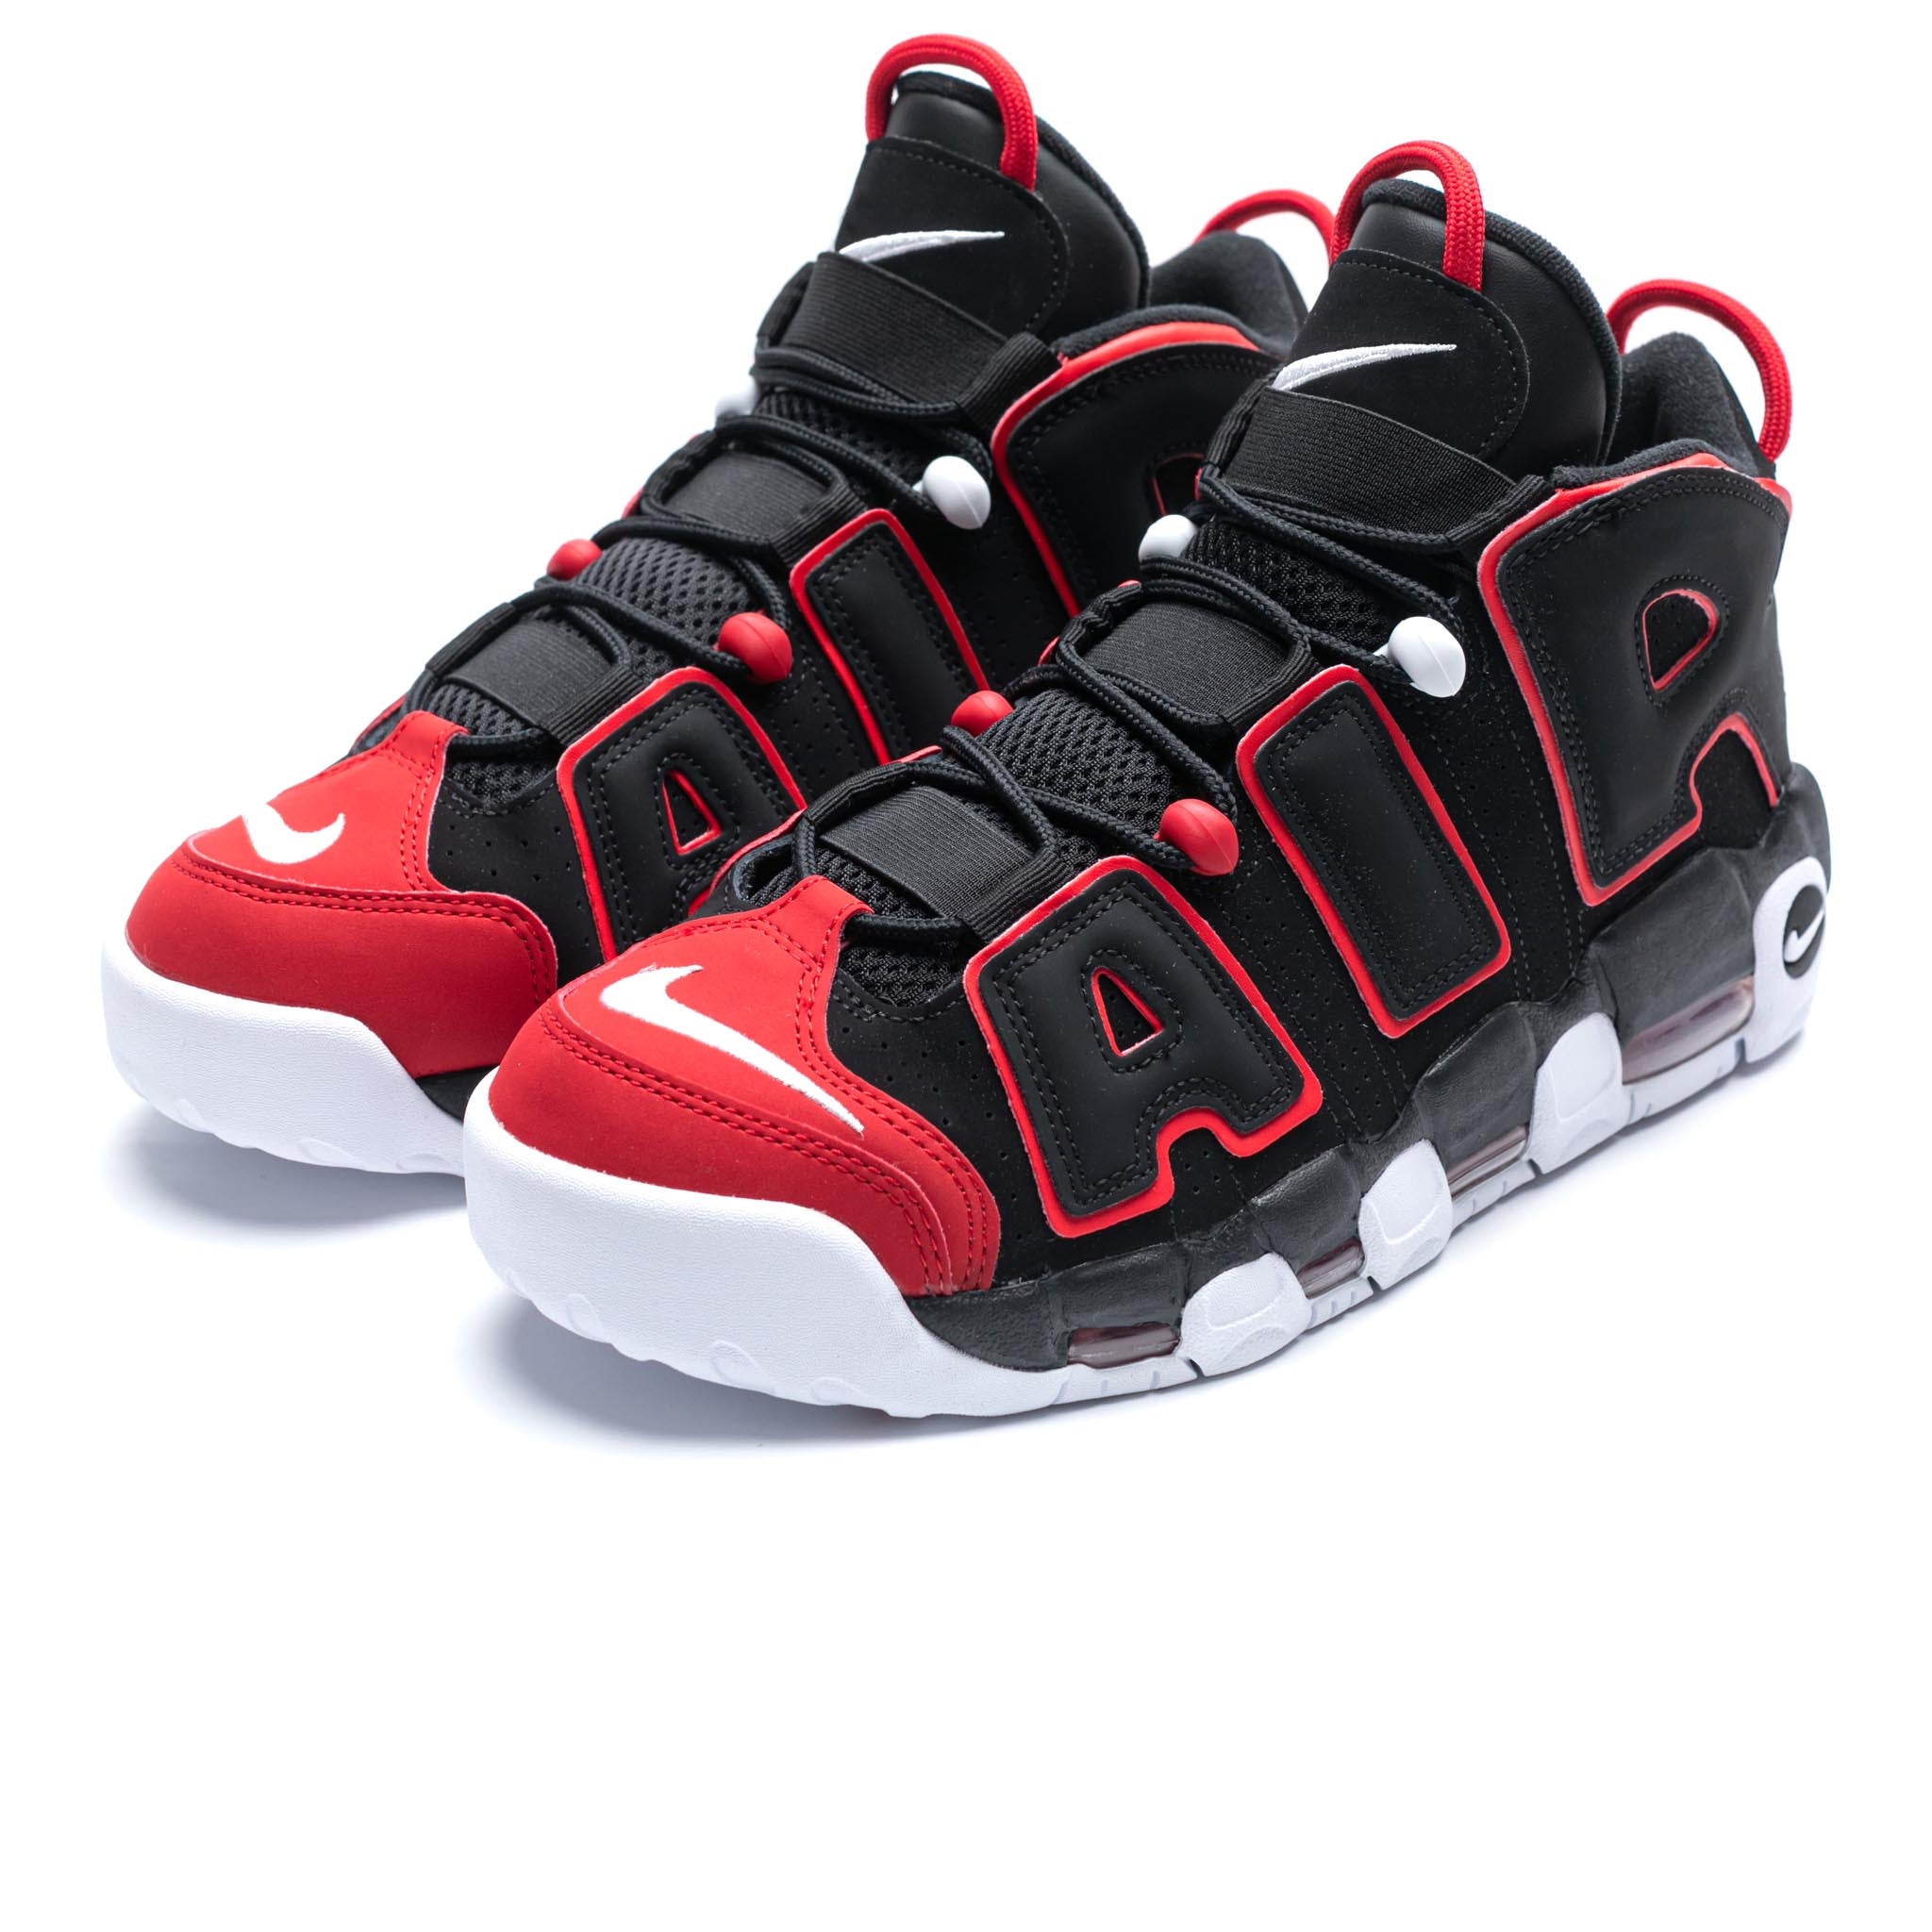 Nike Air More Uptempo 'Red Toe'